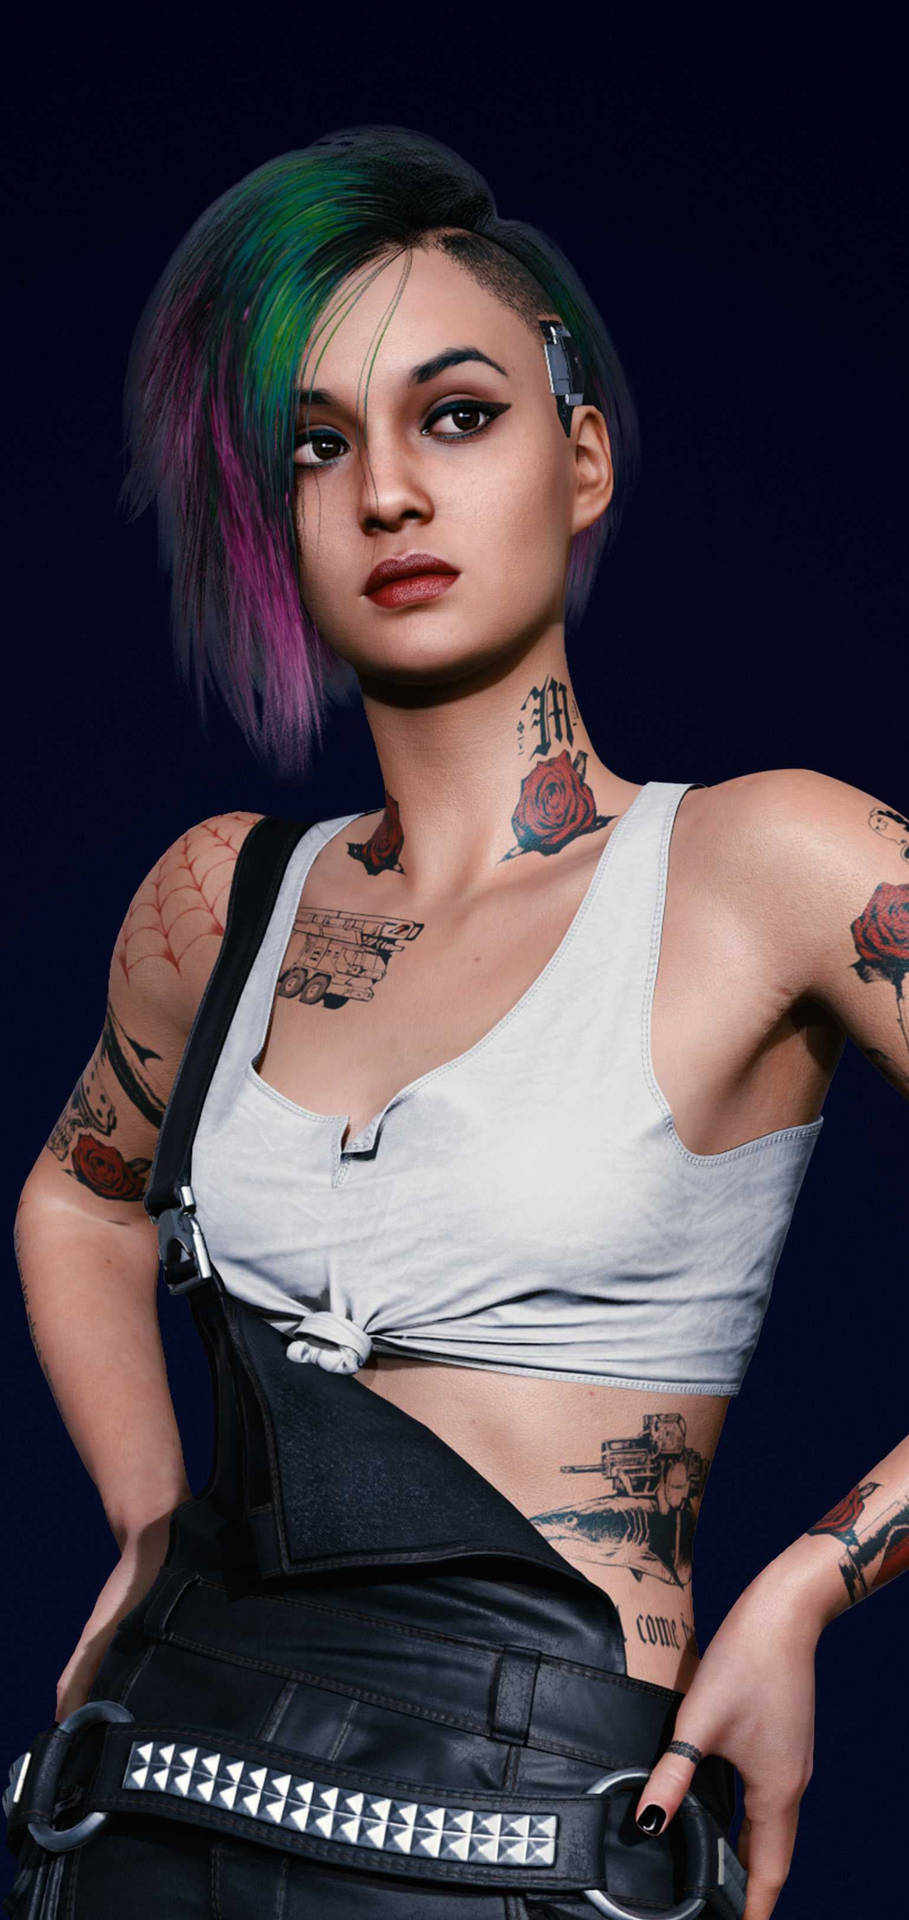 Judy Portrait Photo In Cyberpunk For Android